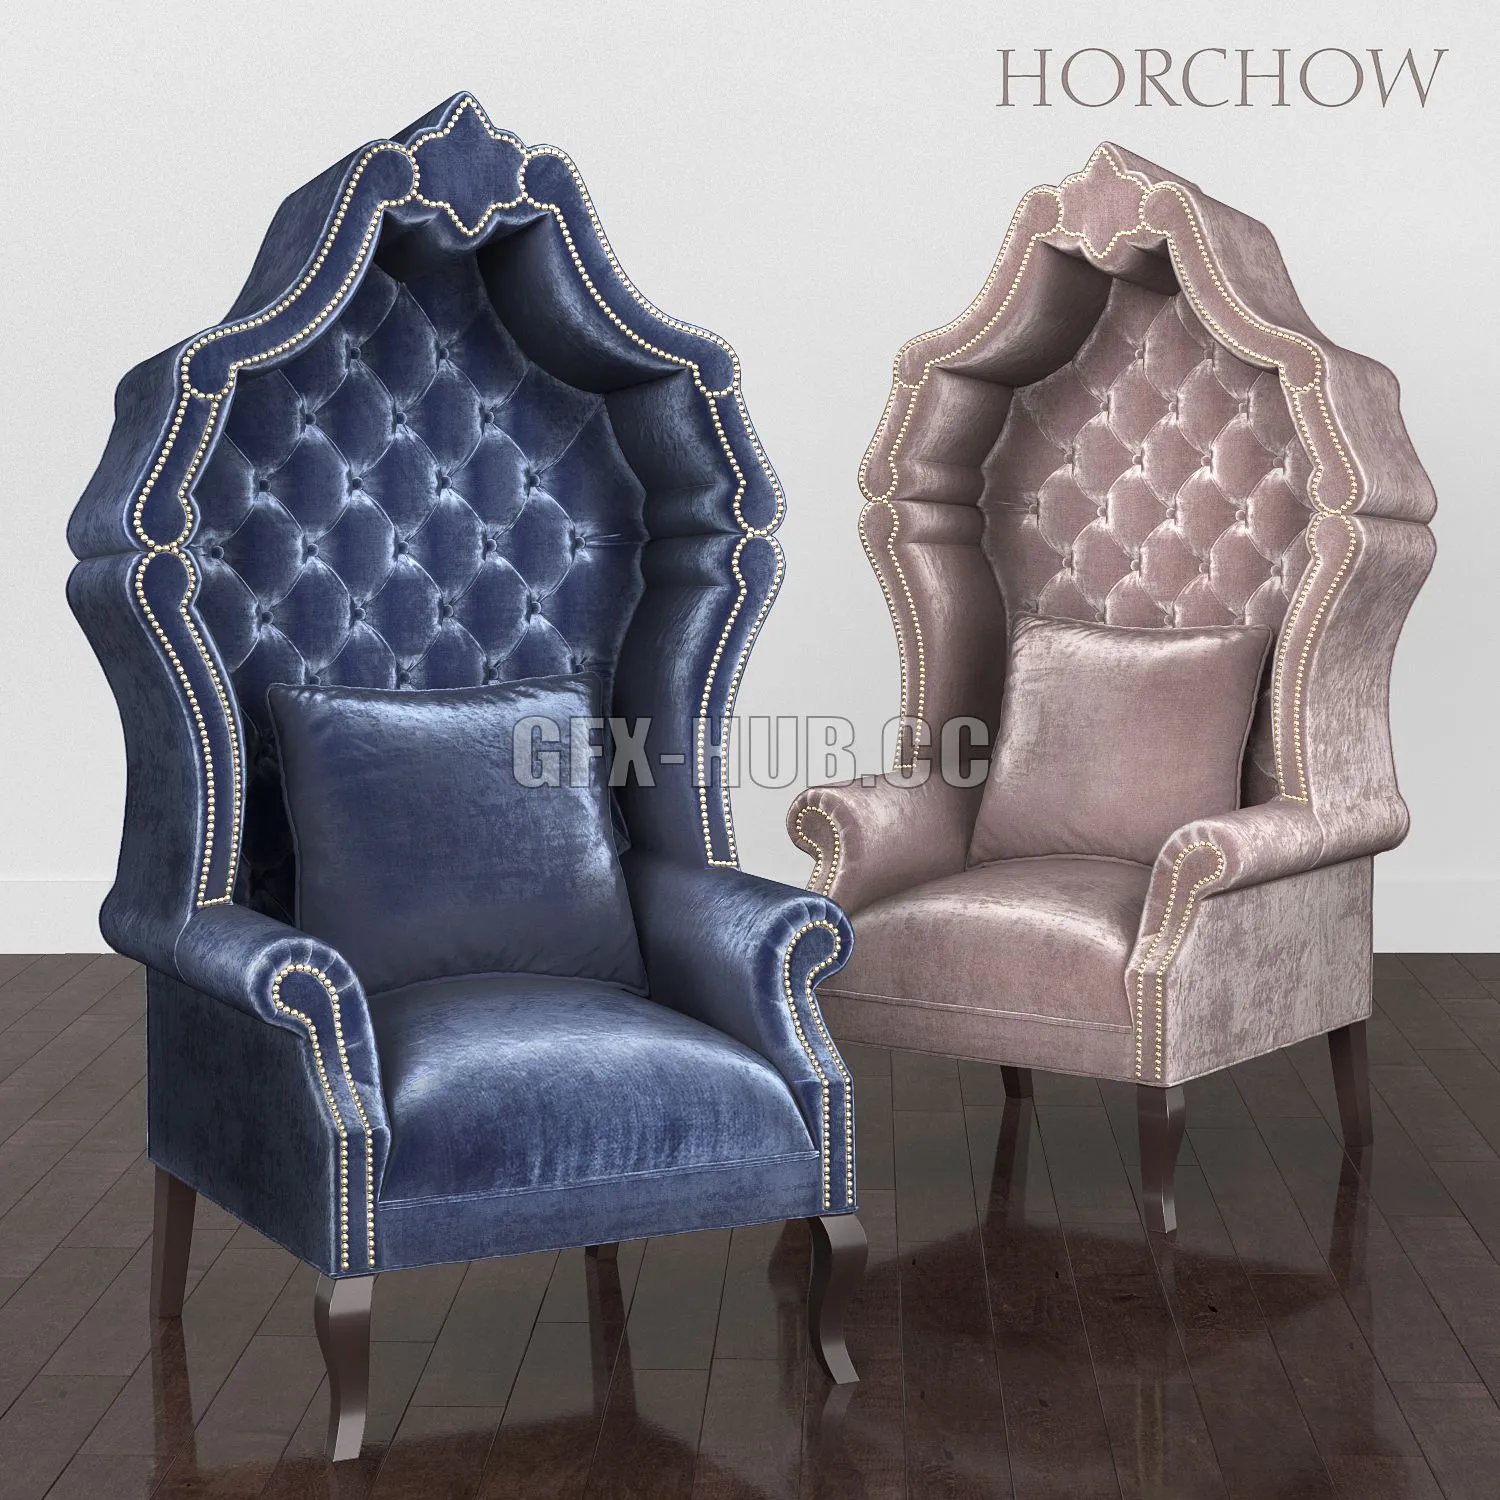 FURNITURE 3D MODELS – Antoinette Midnight Chair Horchow